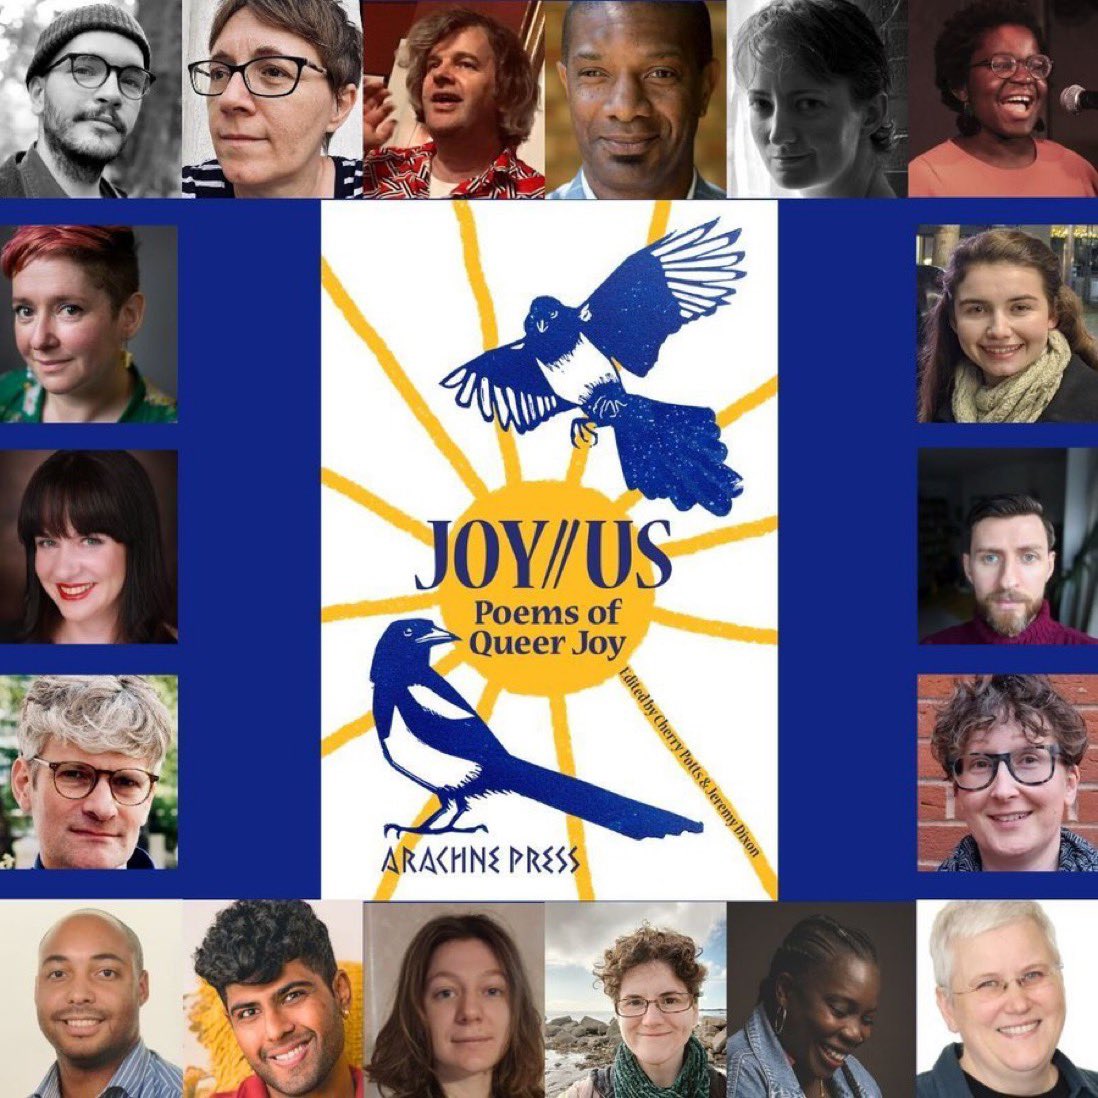 Coming up next week, two readings to launch @ArachnePress’ JOY//US: Poems of Queer Joy! Tickets at link. Thursday 23 May, 7pm (£8) Brixton @BooksRound roundtablebooks.co.uk/events-store/j… Friday 24 May, 7pm (FREE) Brighton @TheQueeryBTN outsavvy.com/event/19853/jo… RTs appreciated! 🌈❤️🏳️‍⚧️✍️🕺